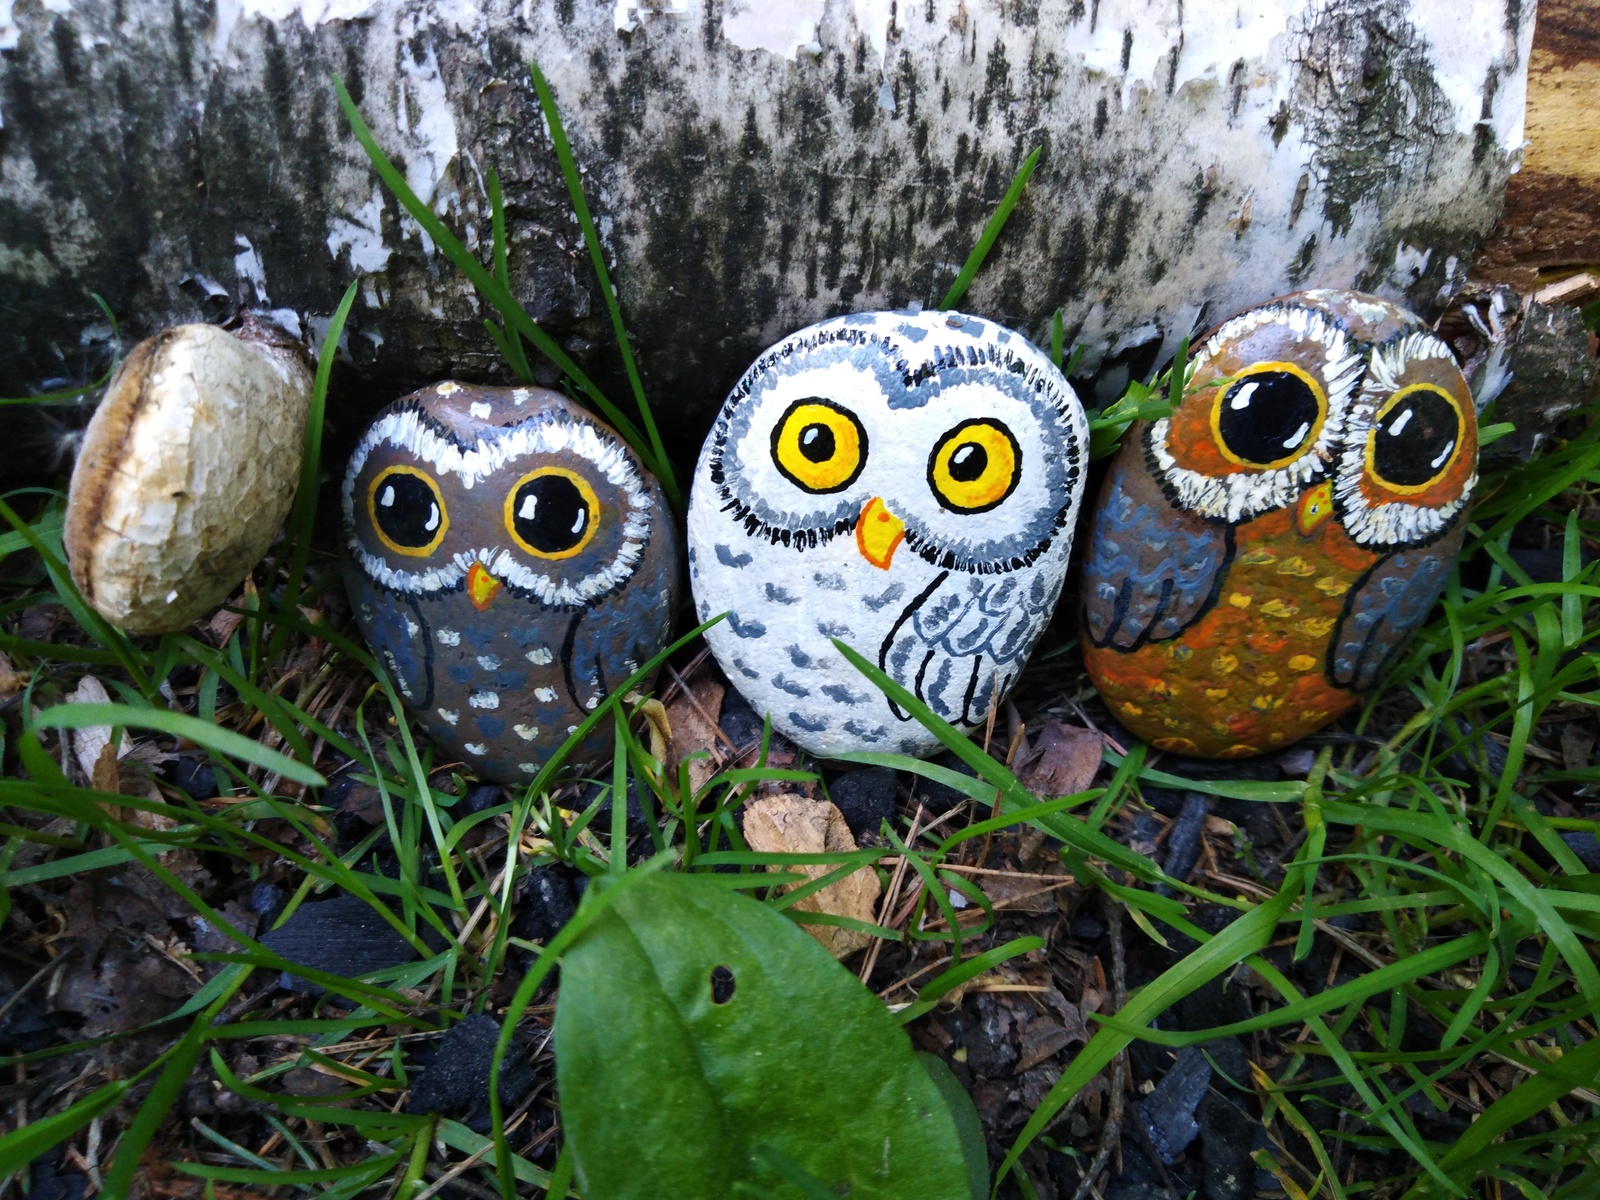 The Big Owl family is looking for a home! - My, Owl, Is free, Freebie, For free, Handmade, Creation